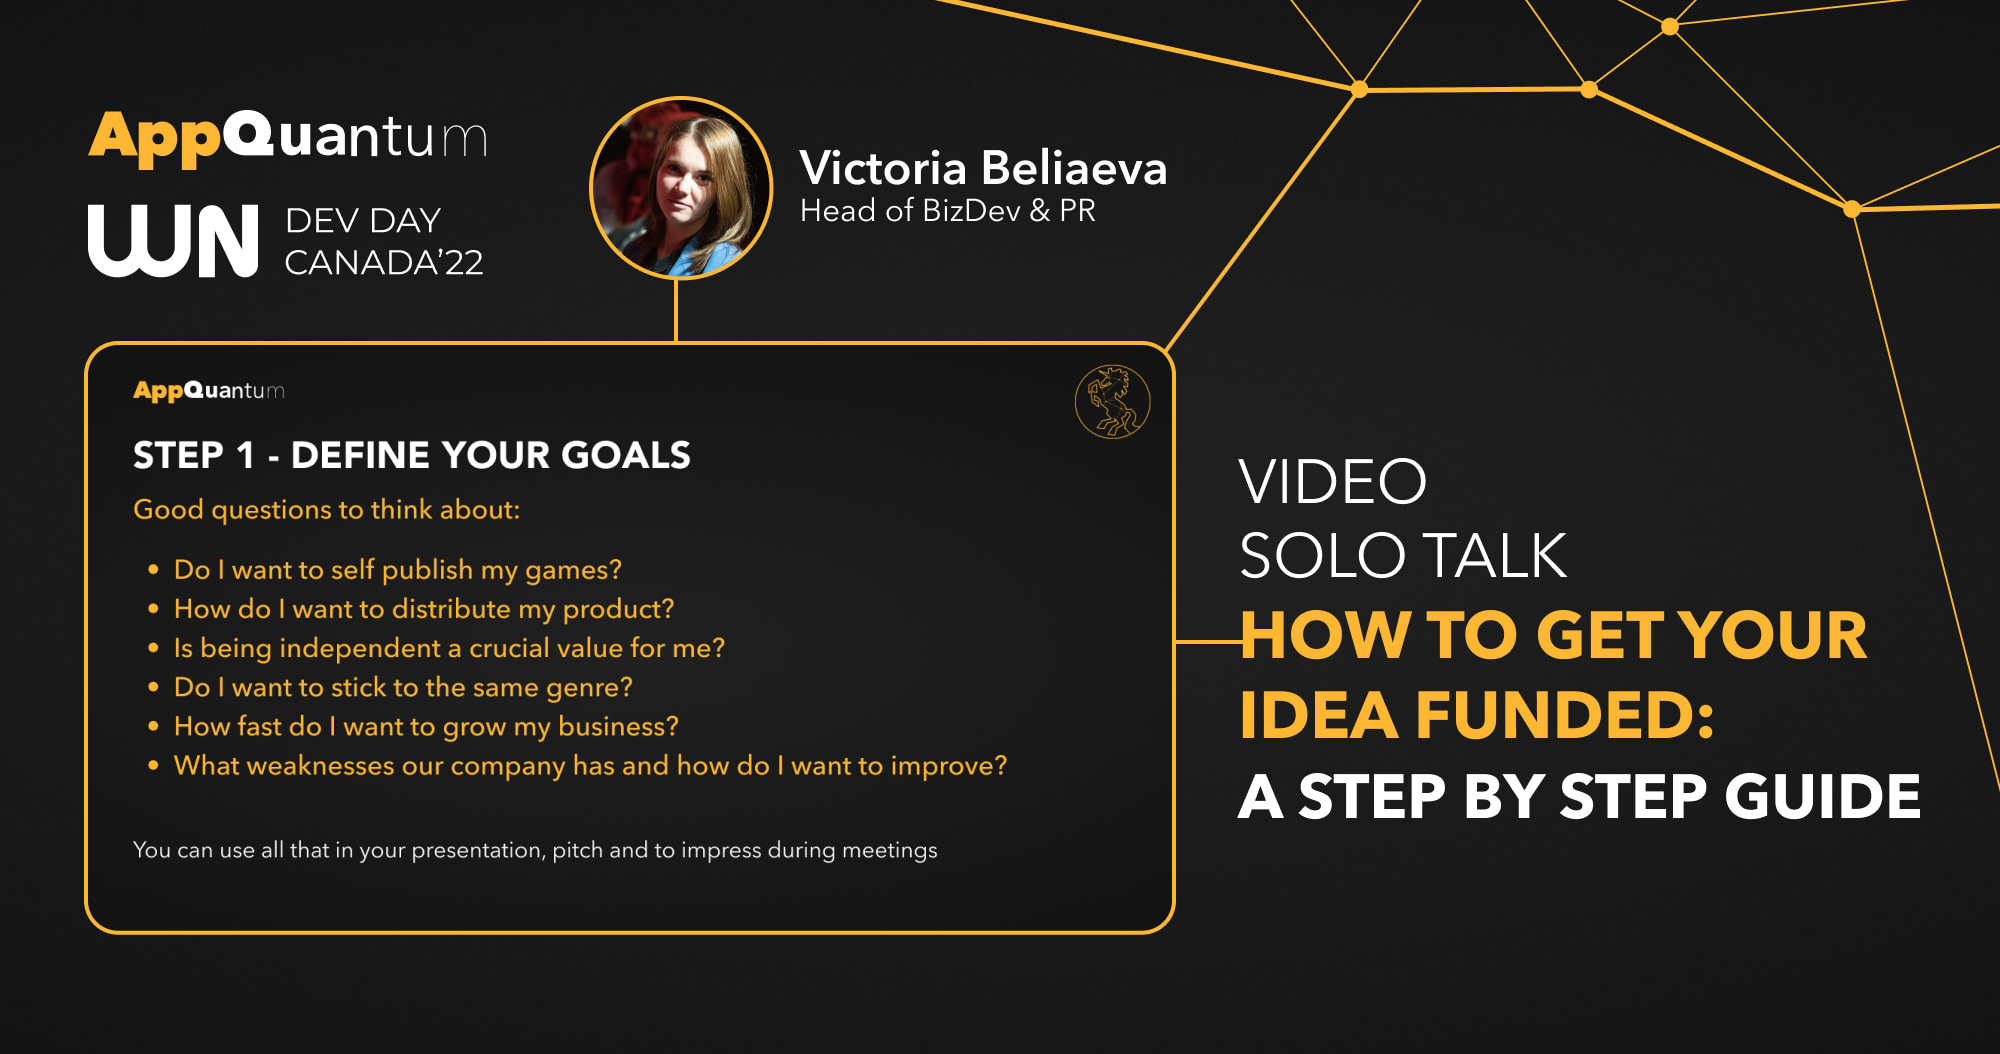 Victoria Beliaeva Solo Talk: “How to Get Your Idea Funded: A Step by Step Guide”